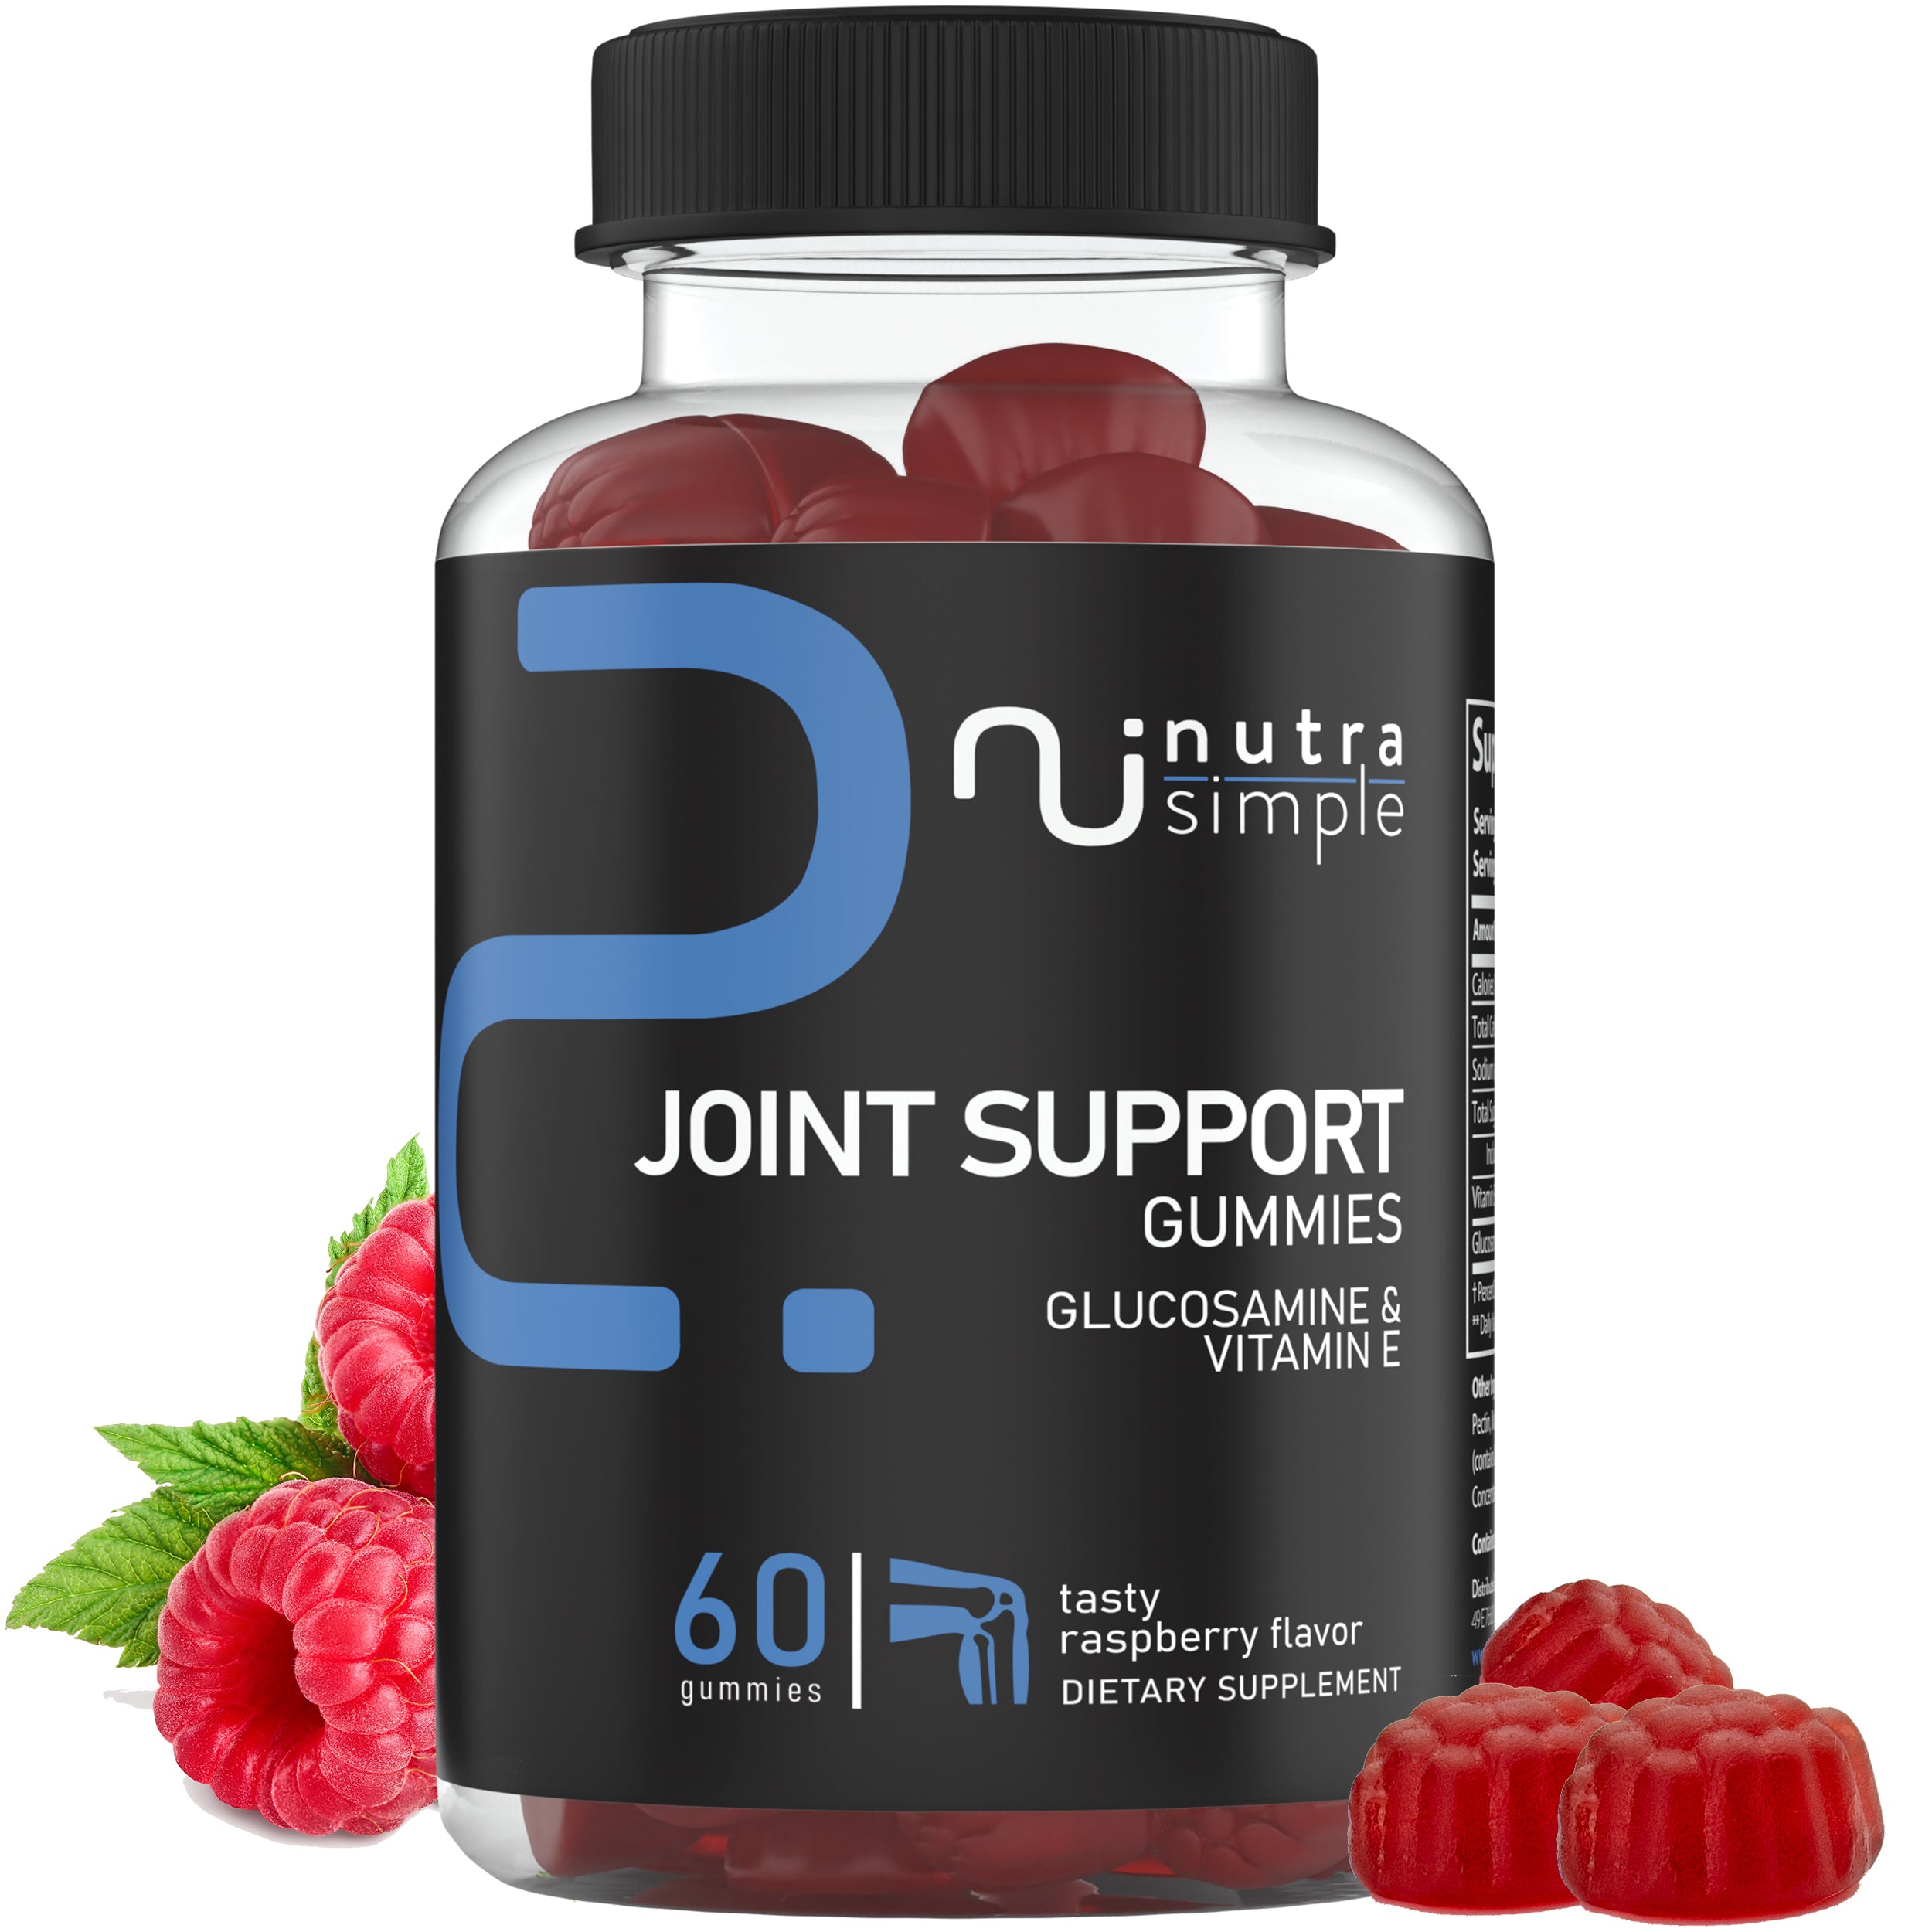 Joint Support Gummies with Glucosamine & Vitamin E - 60 Gummies